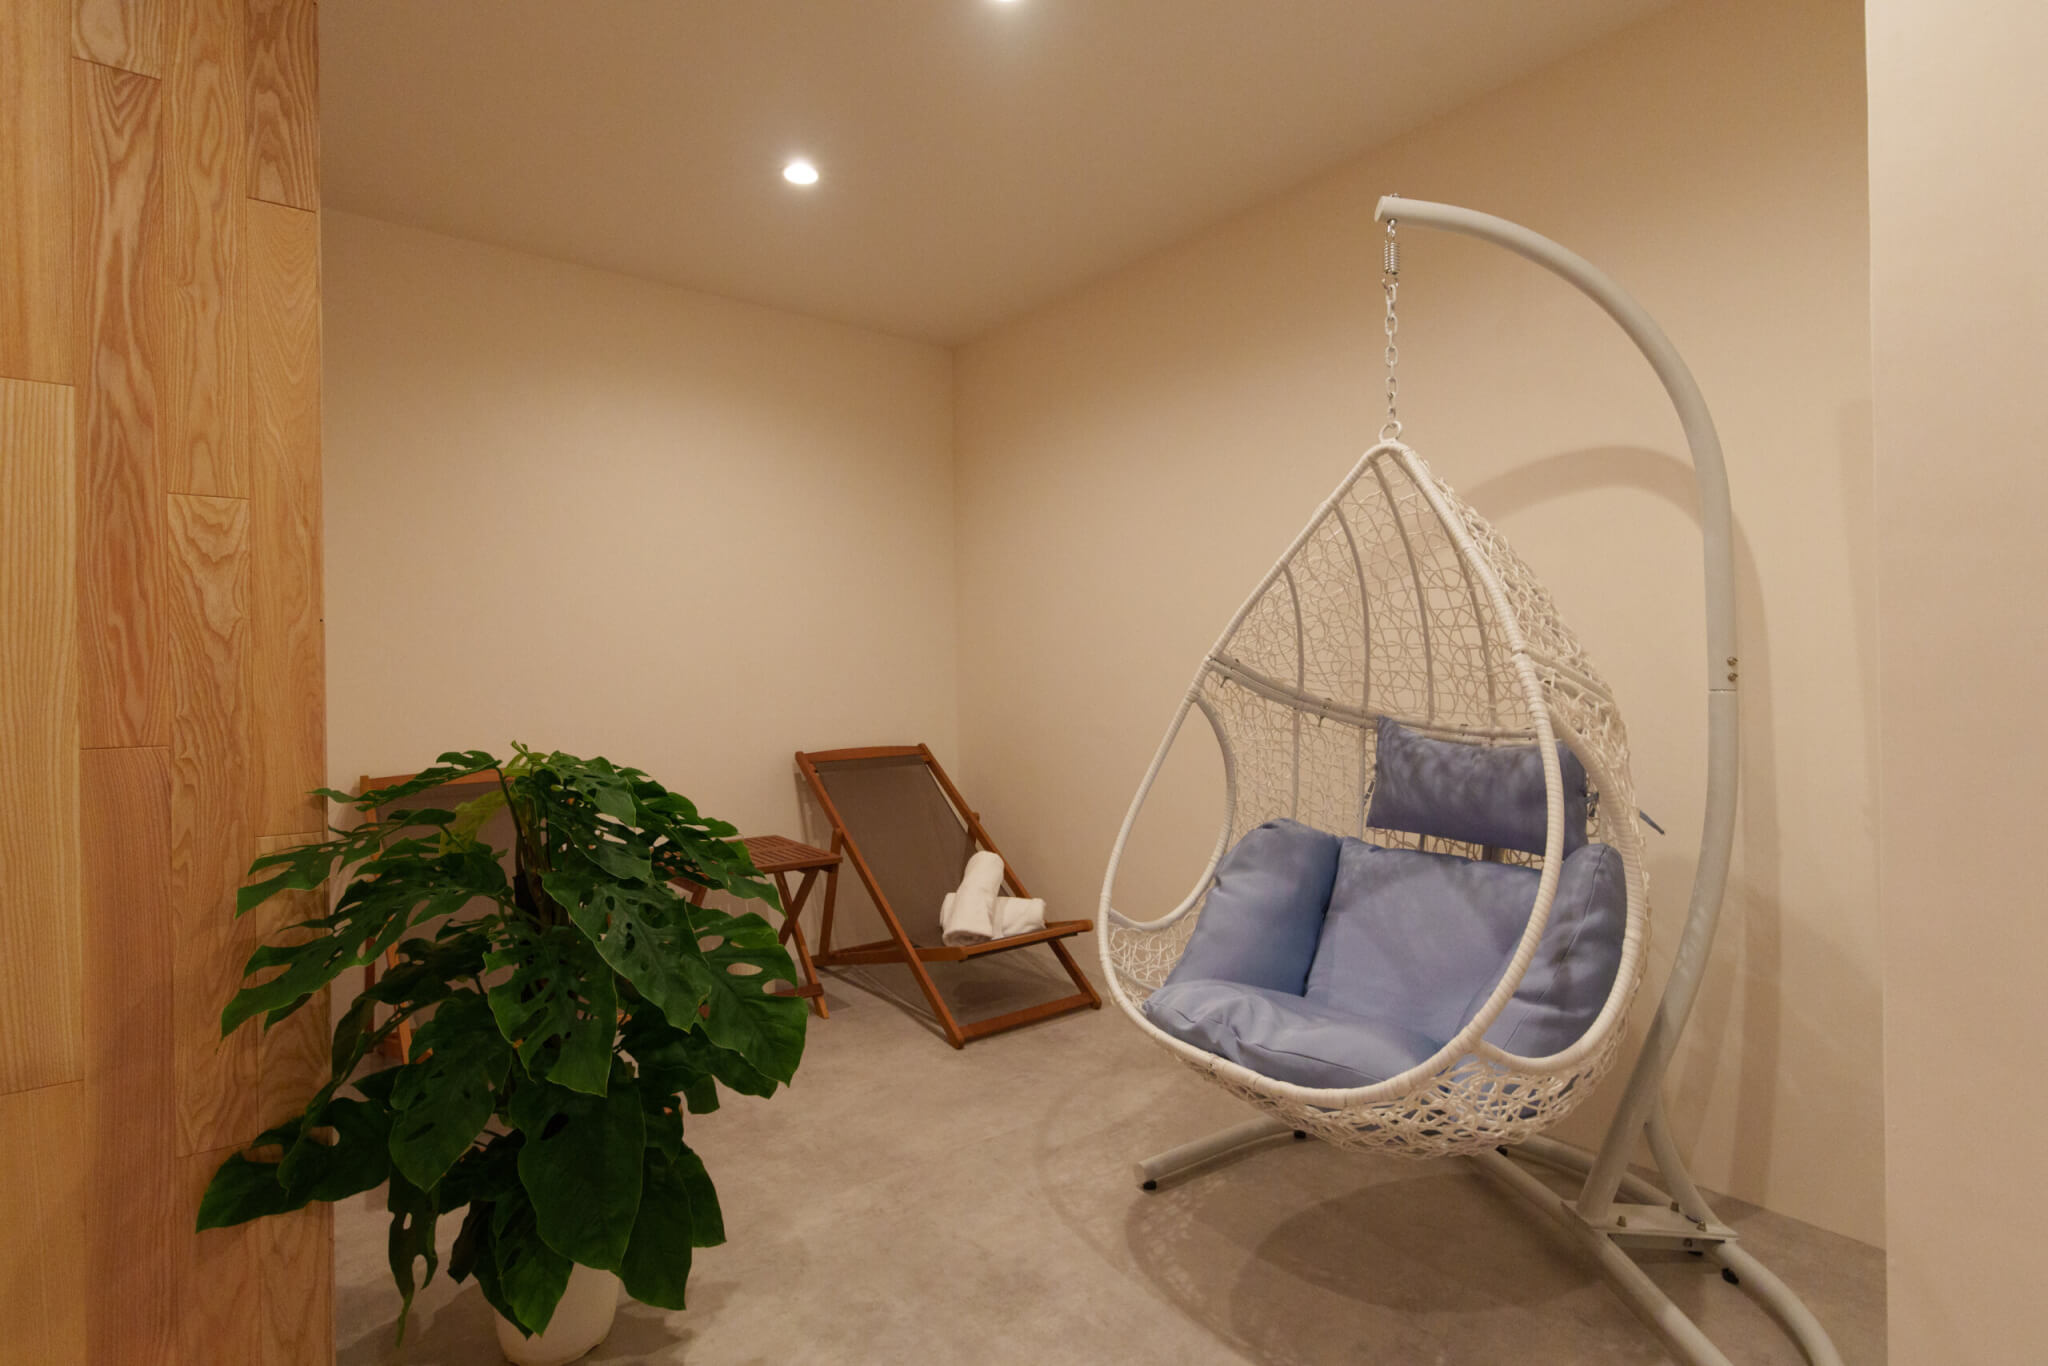 Relaxation Sauna Belle個室の様子